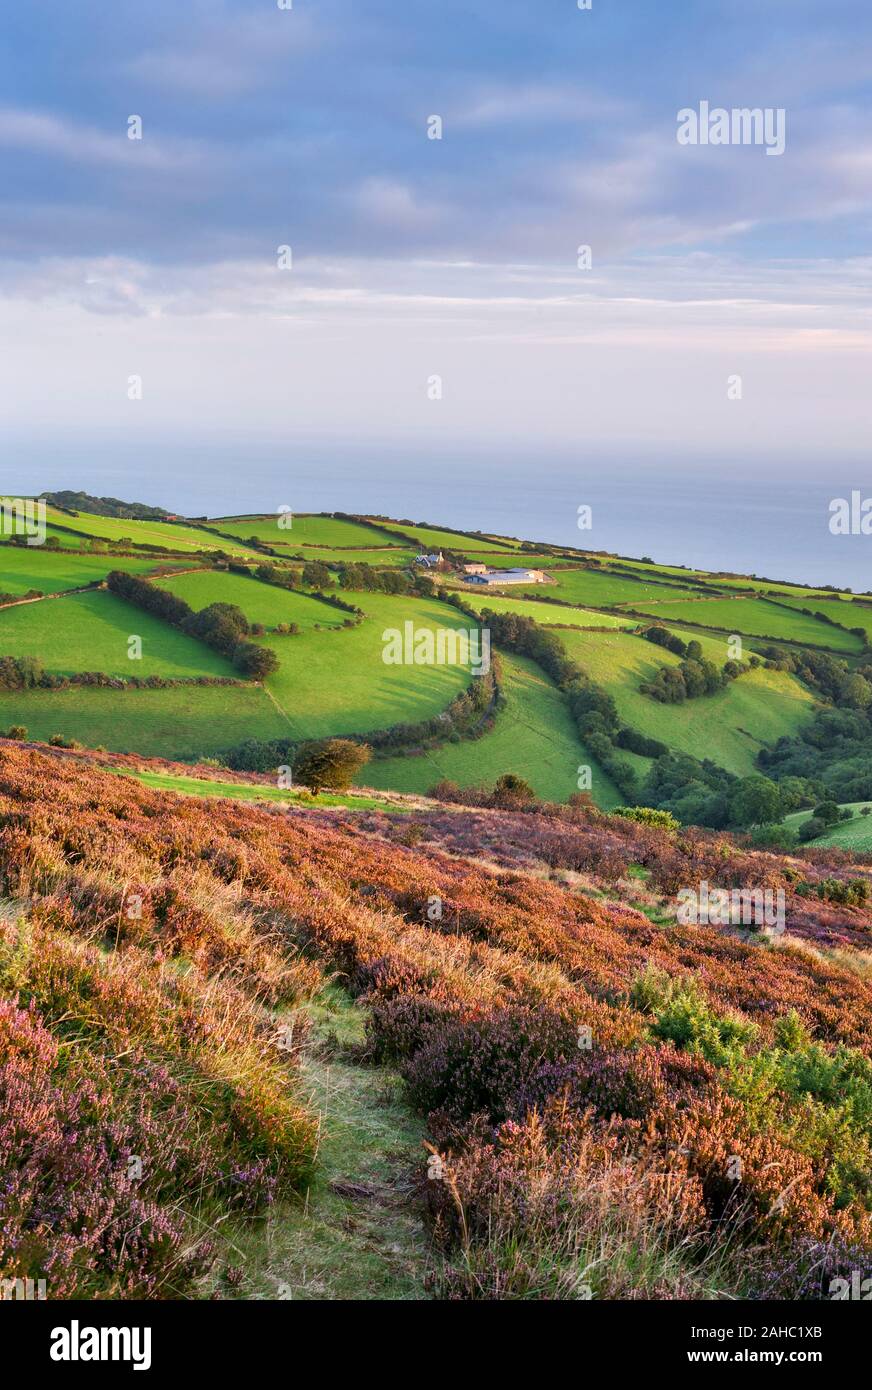 The rolling hills of Exmoor National Park, with rugged, rolling green fields and Purple heathers looking towards the coast and Bristol Channel. Stock Photo